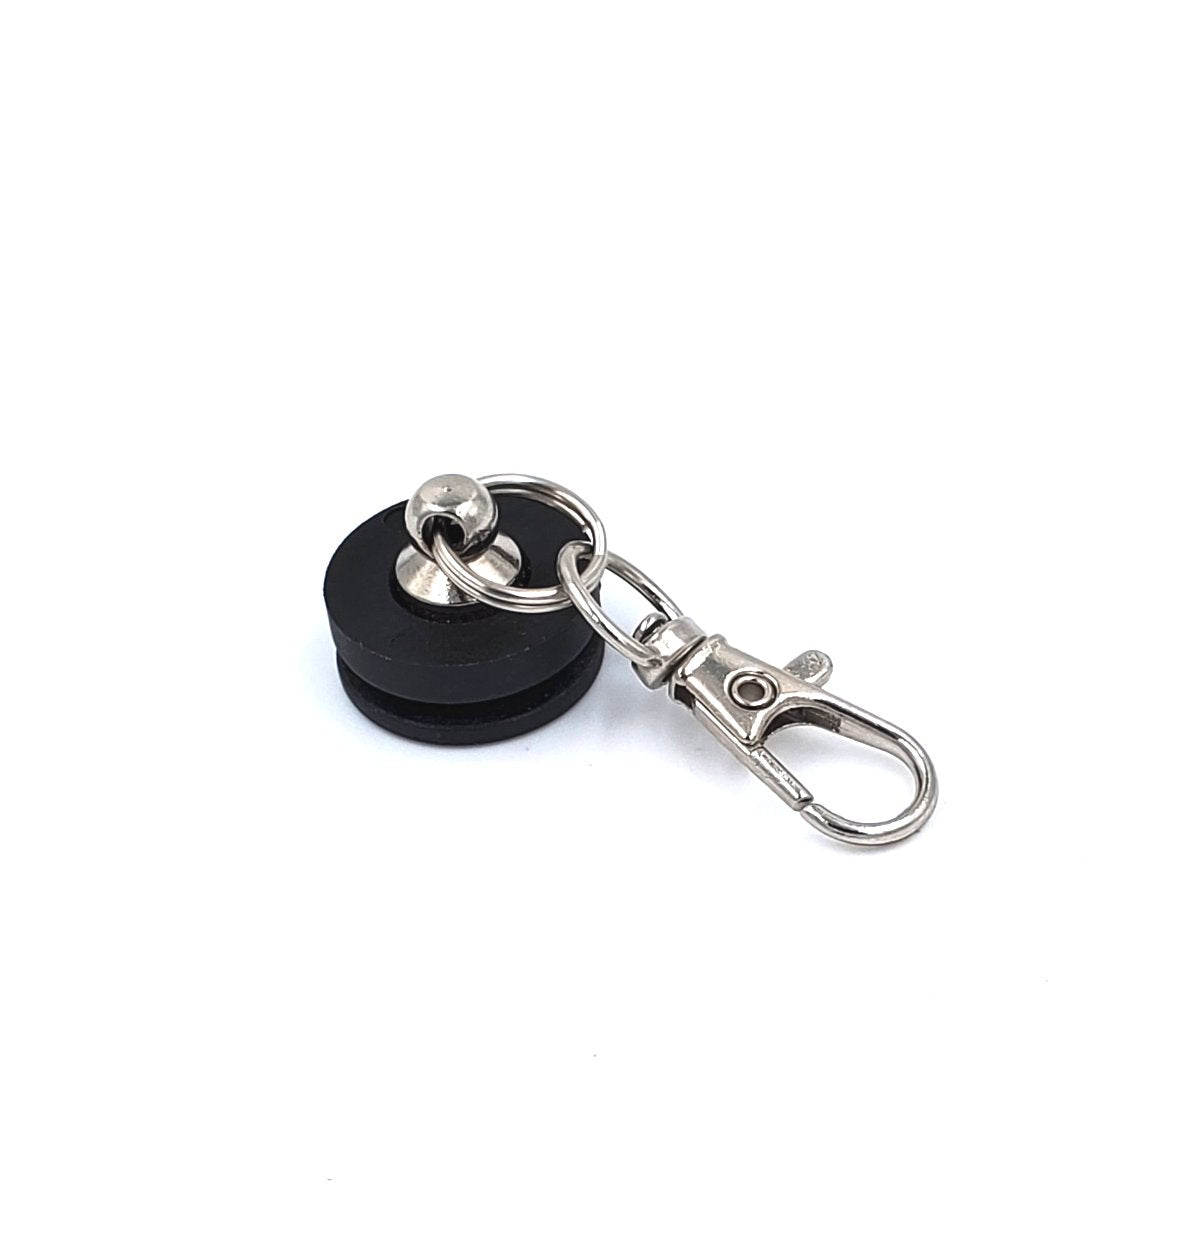 Covertec Wheel D-ring Adapter / Keychain – Vire Sabers